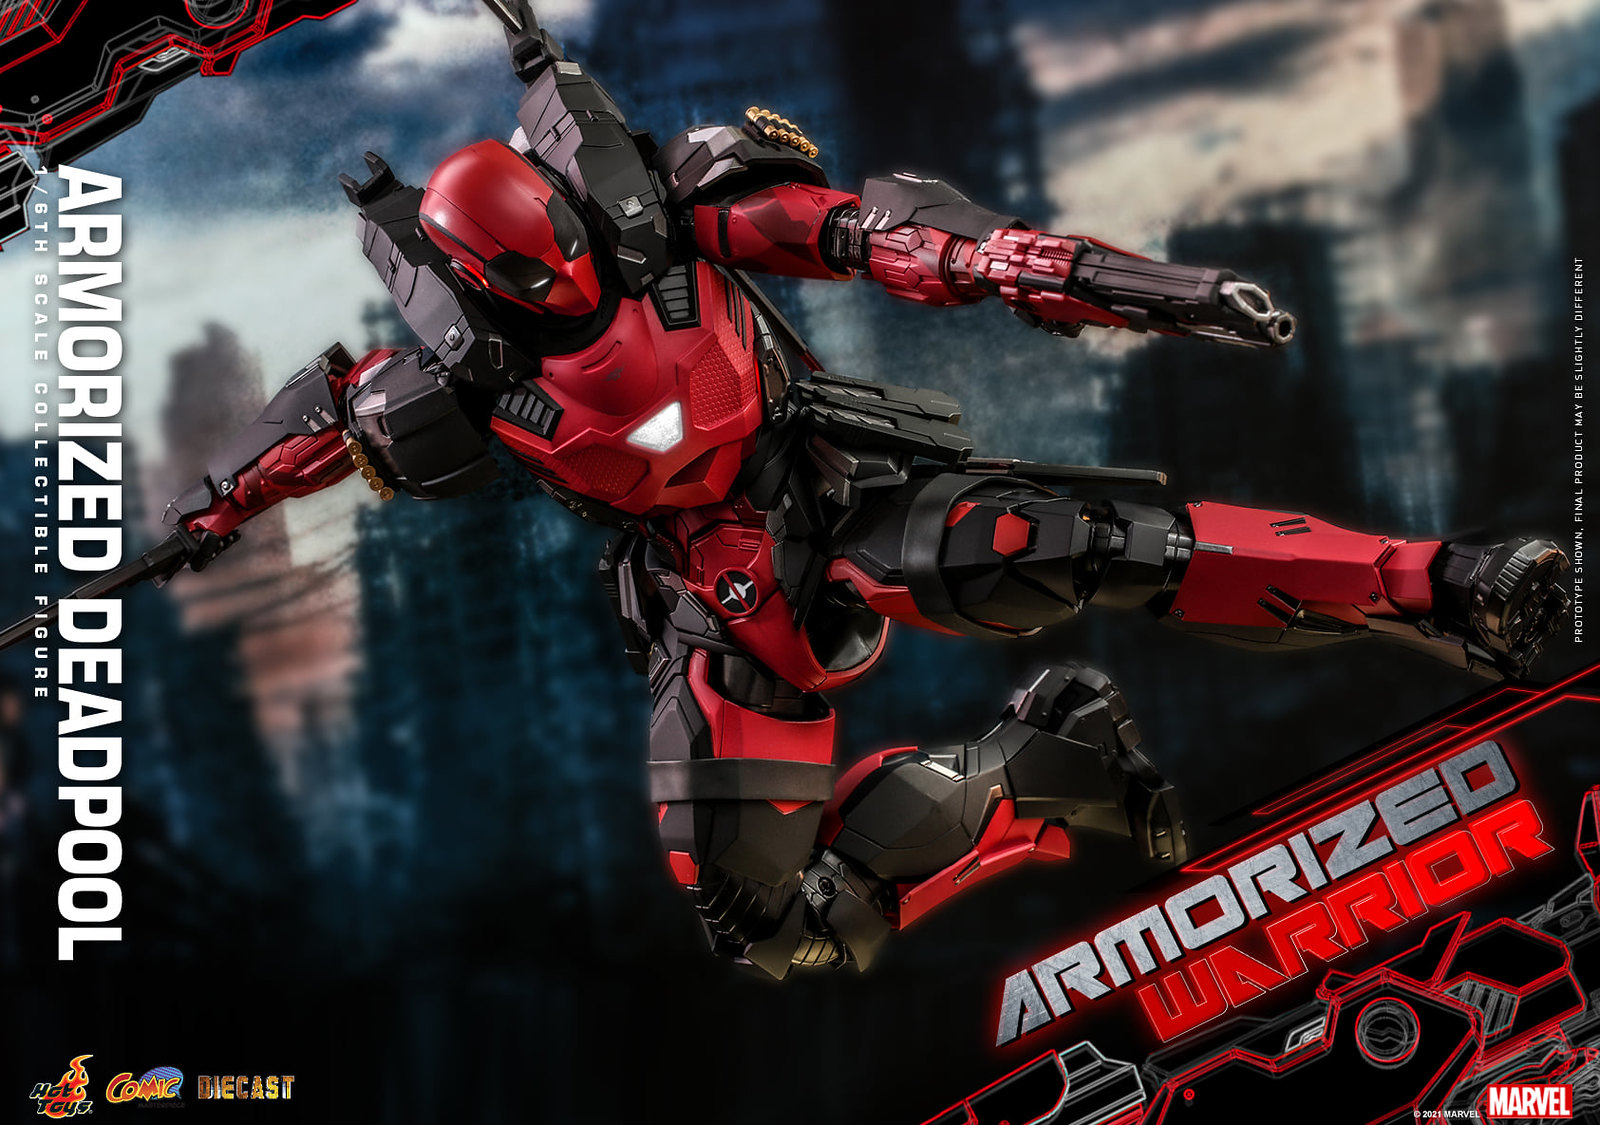 NEW PRODUCT: Hot Toys Armorized Warrior - 1/6th scale Armorized Deadpool Collectible Figure [Armorized Warrior Collection] 51311242901_d3fda21540_h